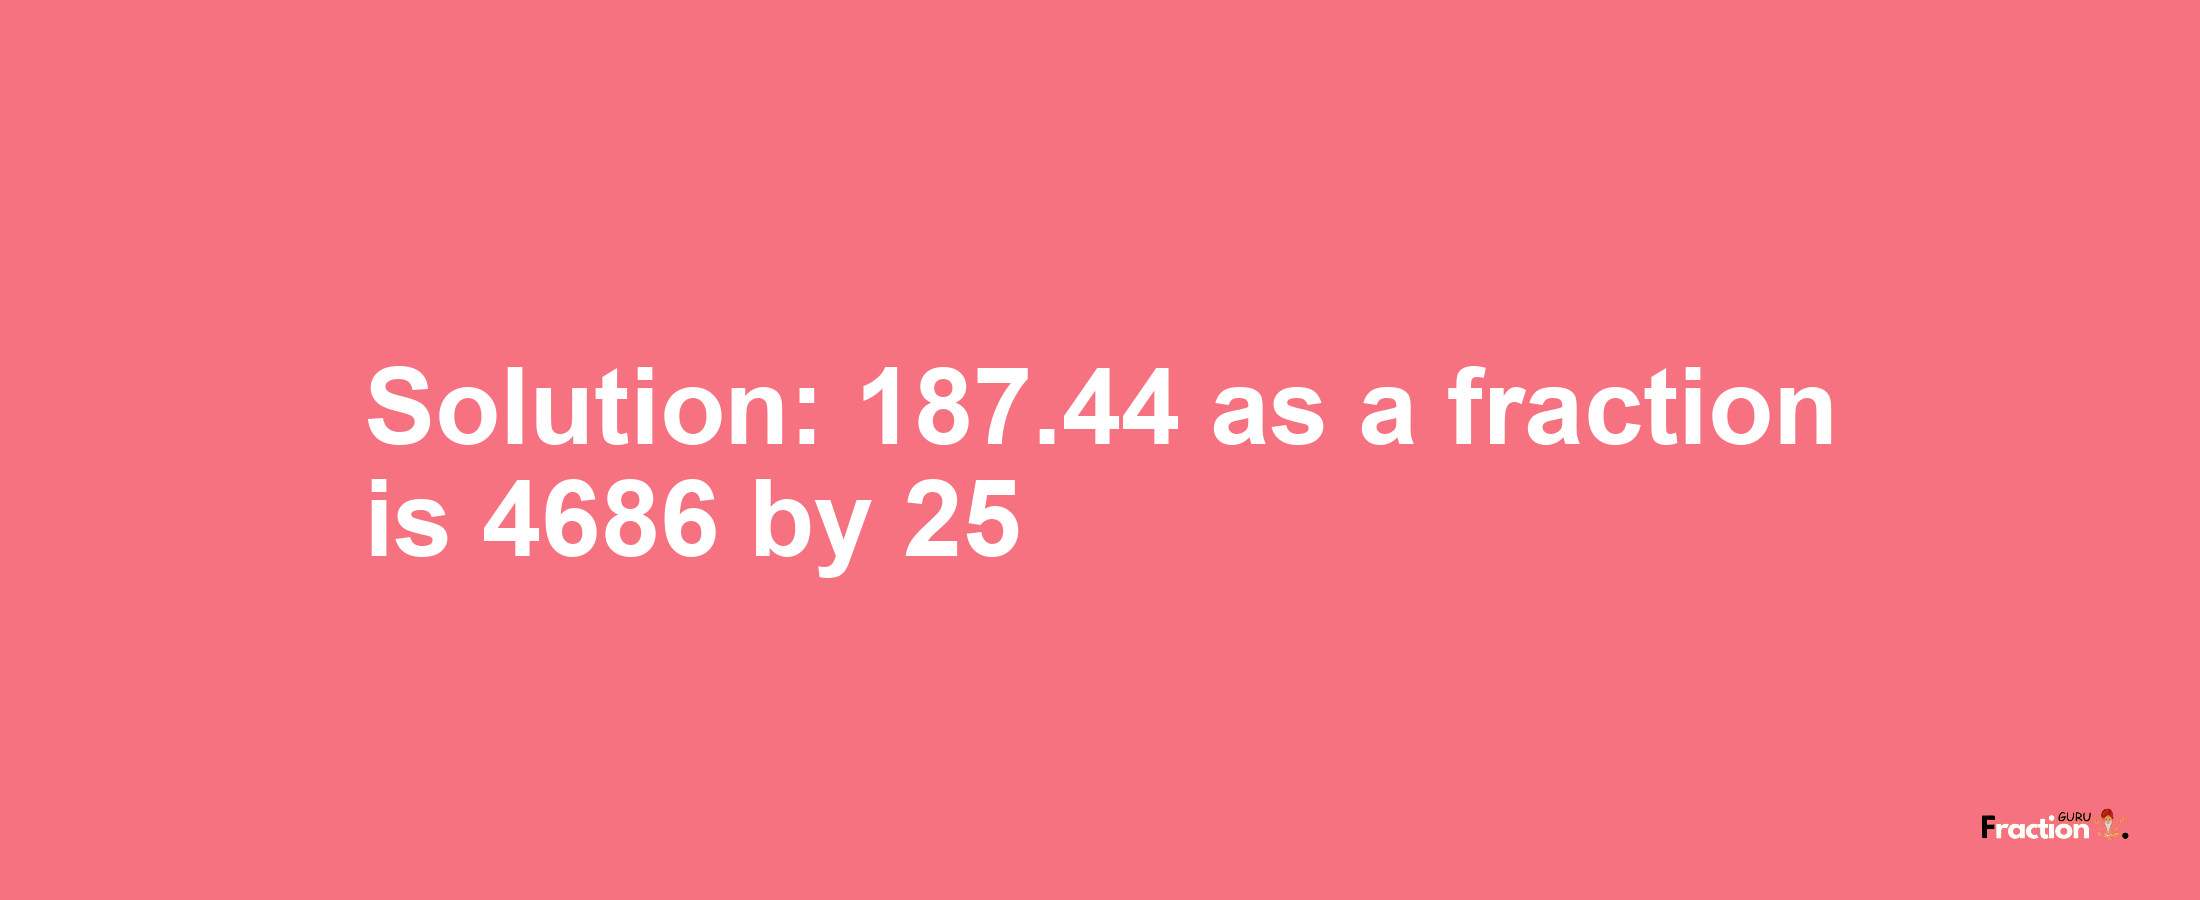 Solution:187.44 as a fraction is 4686/25